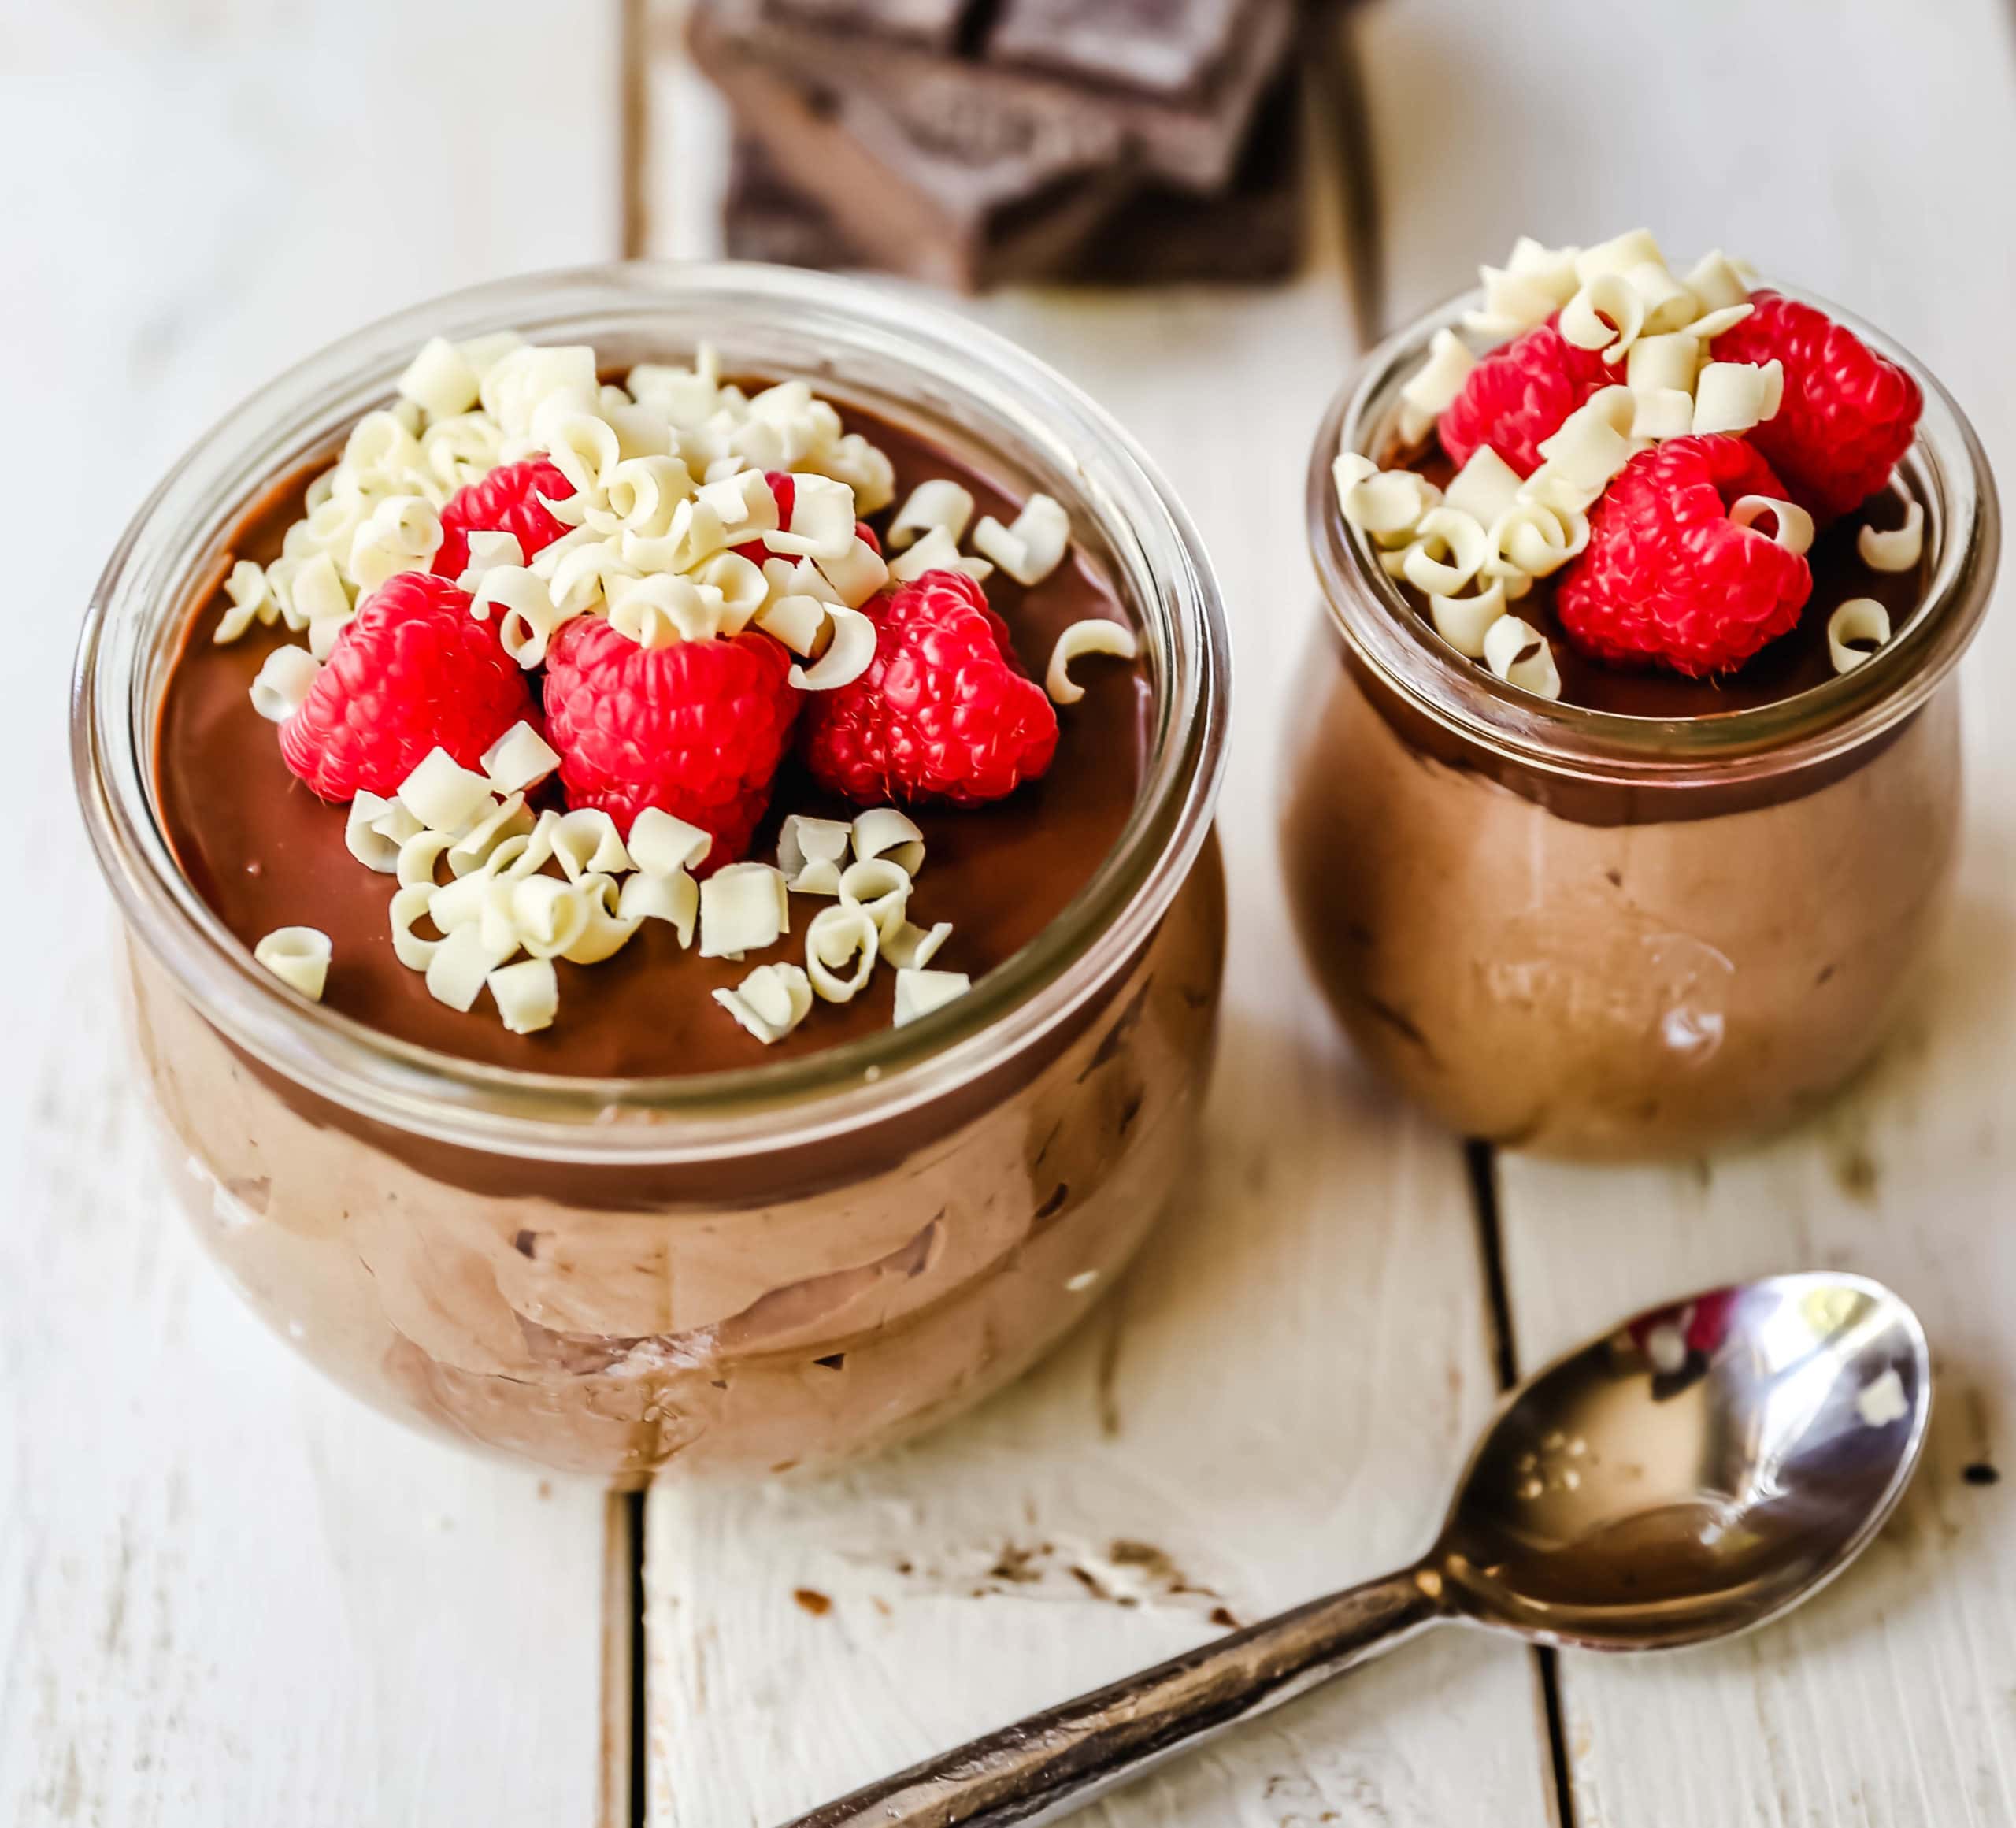 Chocolate Nutella Cheesecake Mousse No-Bake 5-Minute Chocolate Nutella Mousse made with only four ingredients -- Nutella, cream cheese, heavy cream, and powdered sugar.  www.modernhoney.com #mousse #chocolatemousse #dessert